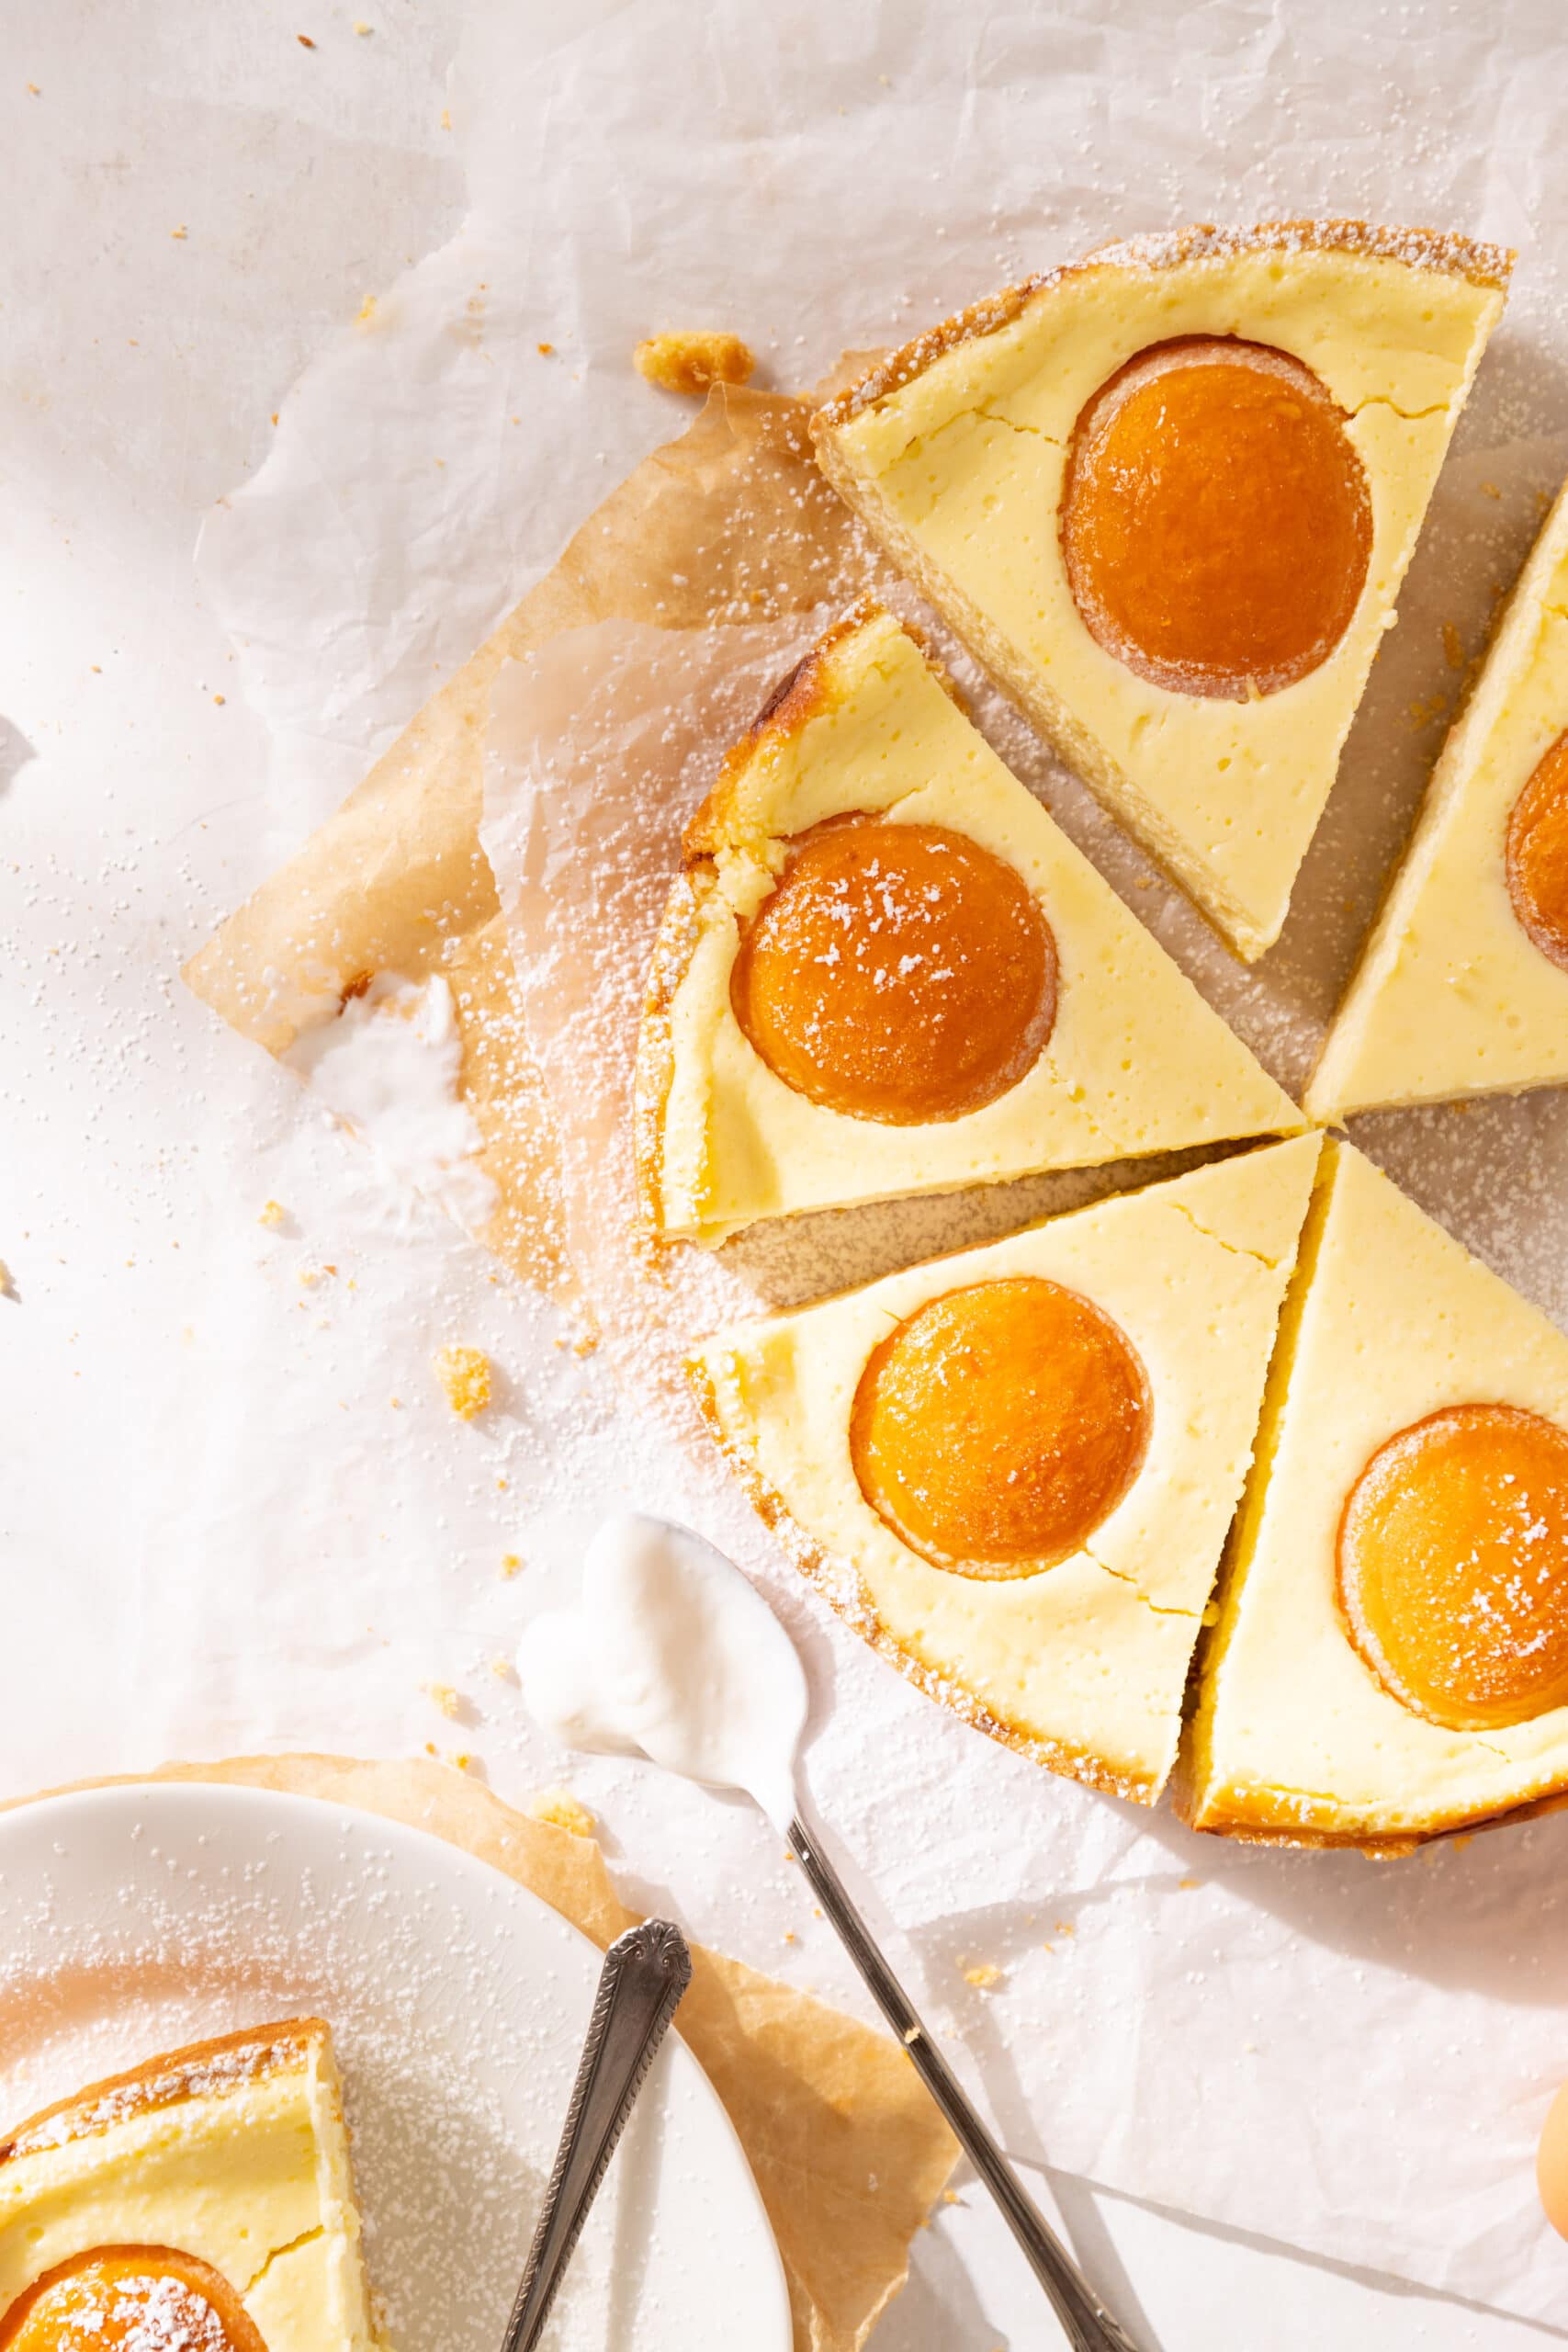 Overhead view of multiple slices of german apricot cheesecake with one slice on a white plate.